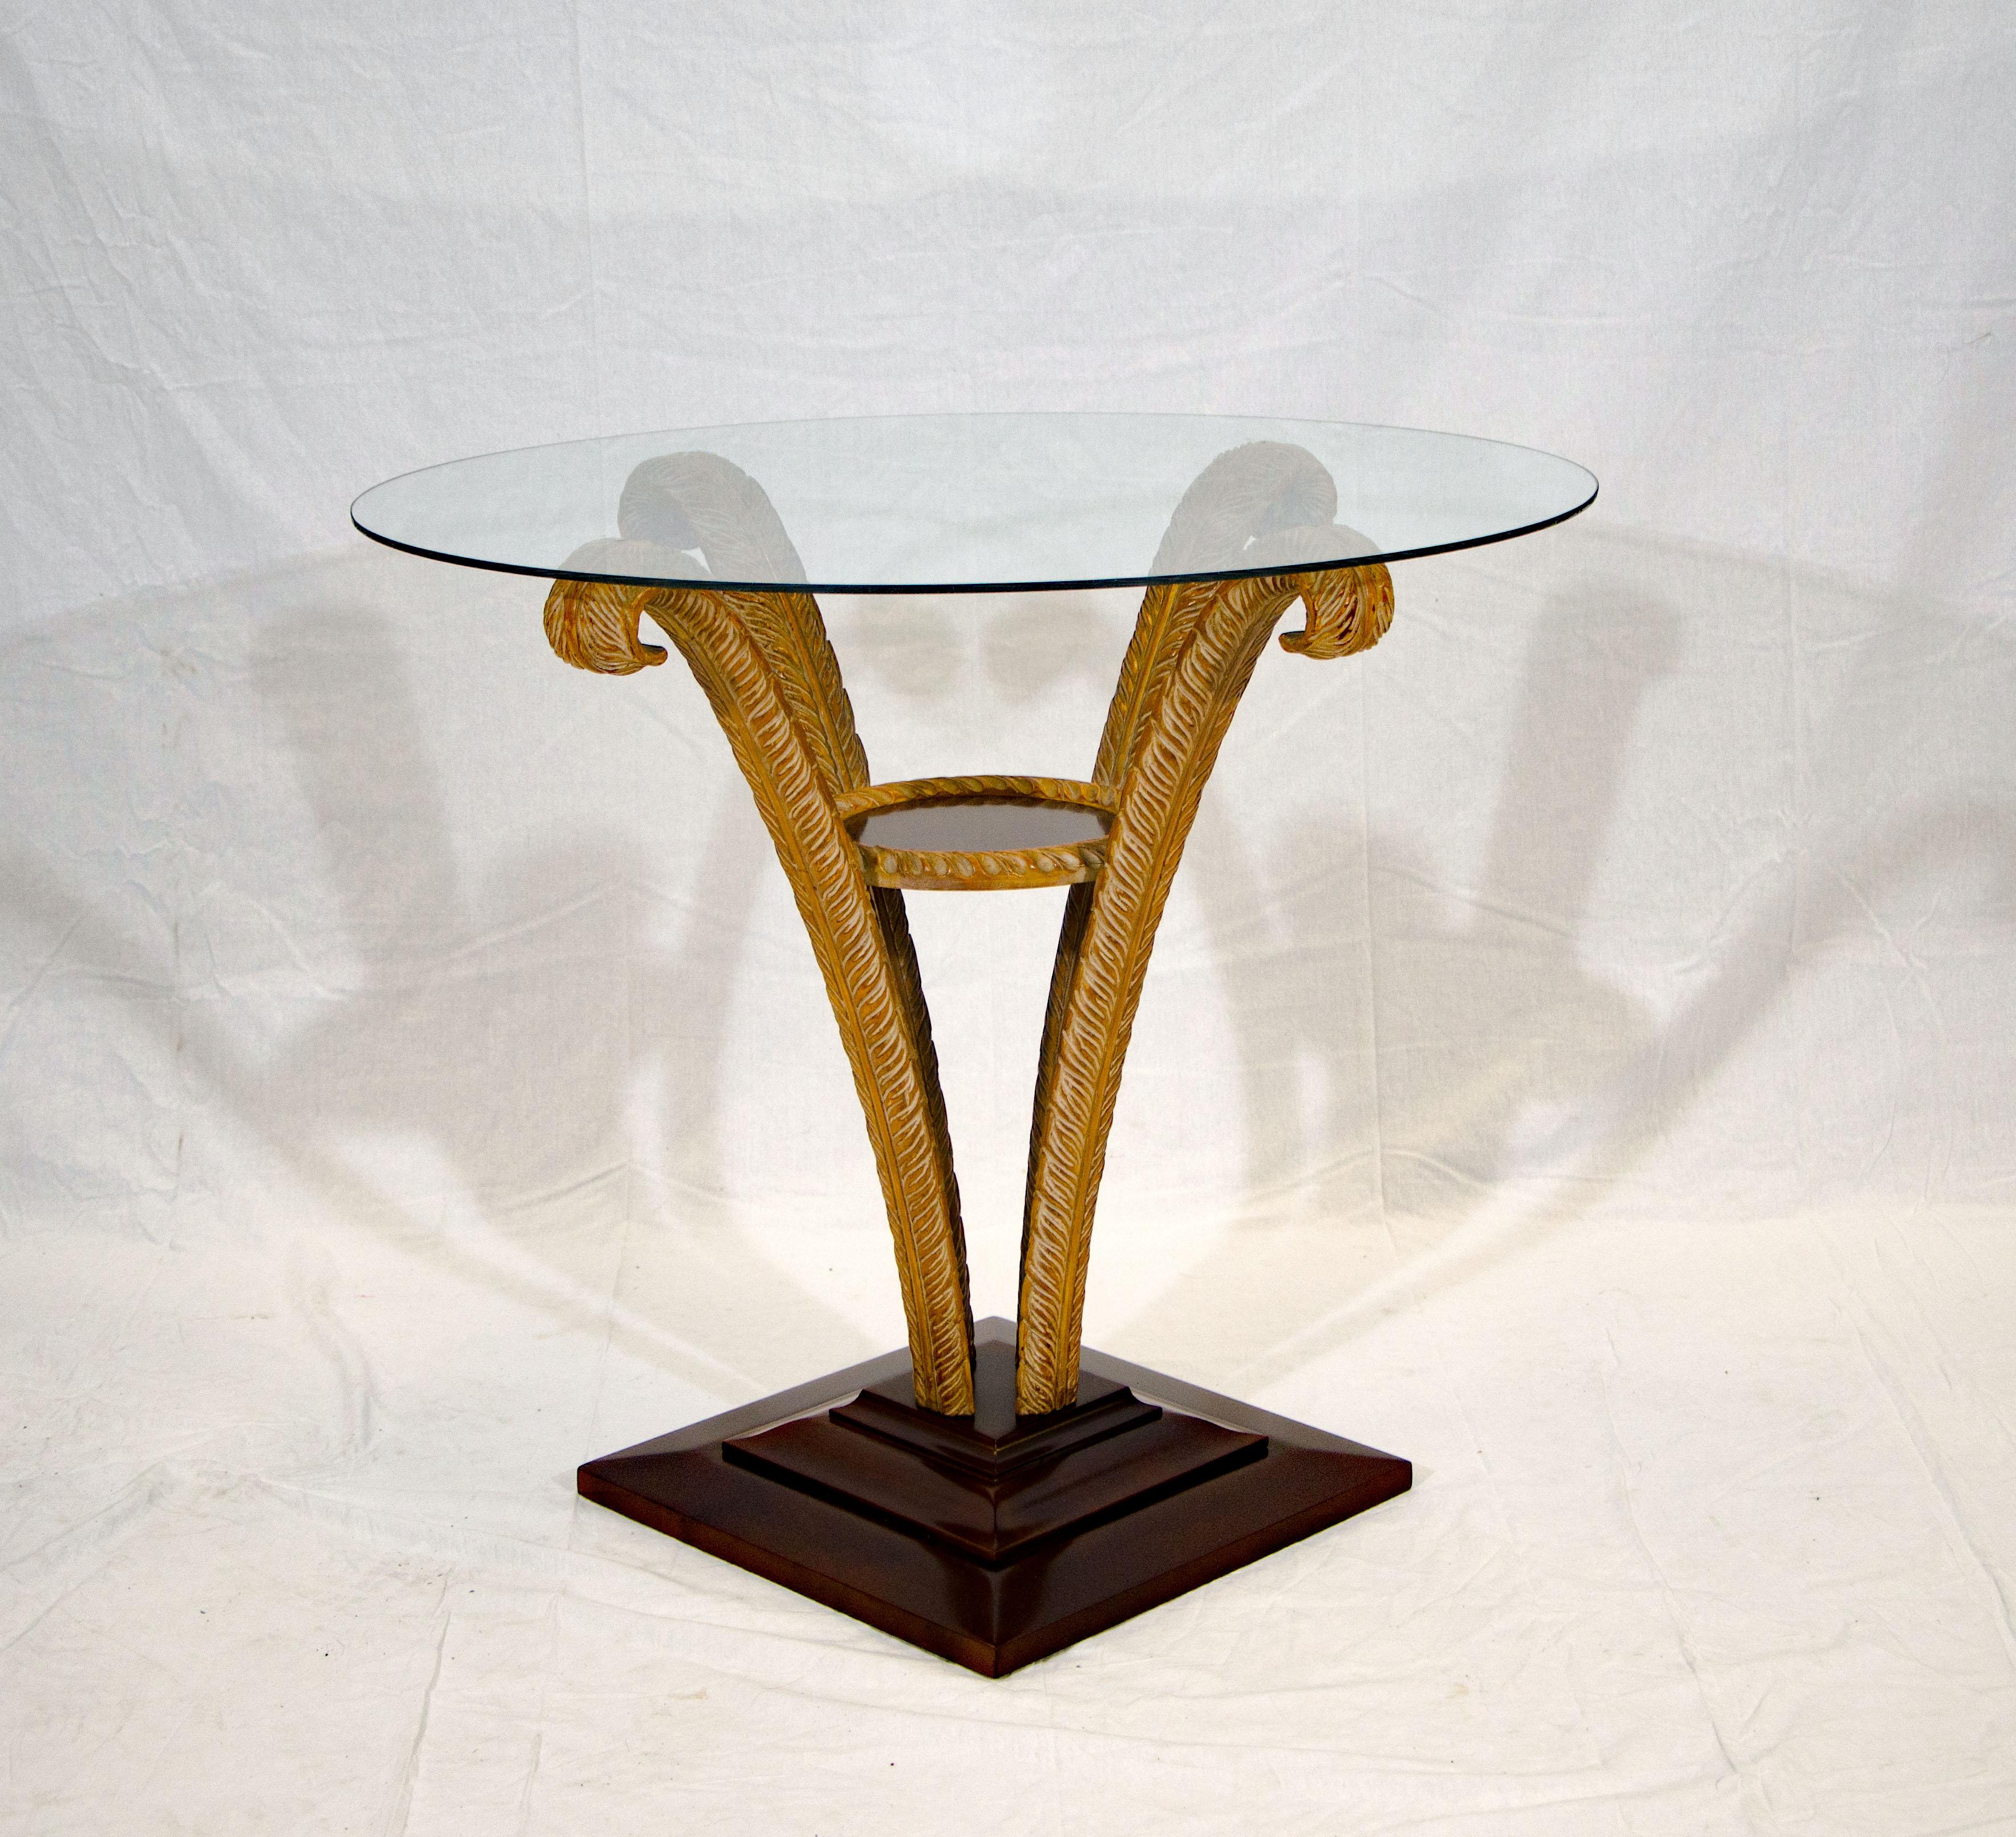 An Grosfeld House table that can complement different decor styles. It would serve well as a center table in an entryway as well as an occasional table in a corner. The 32